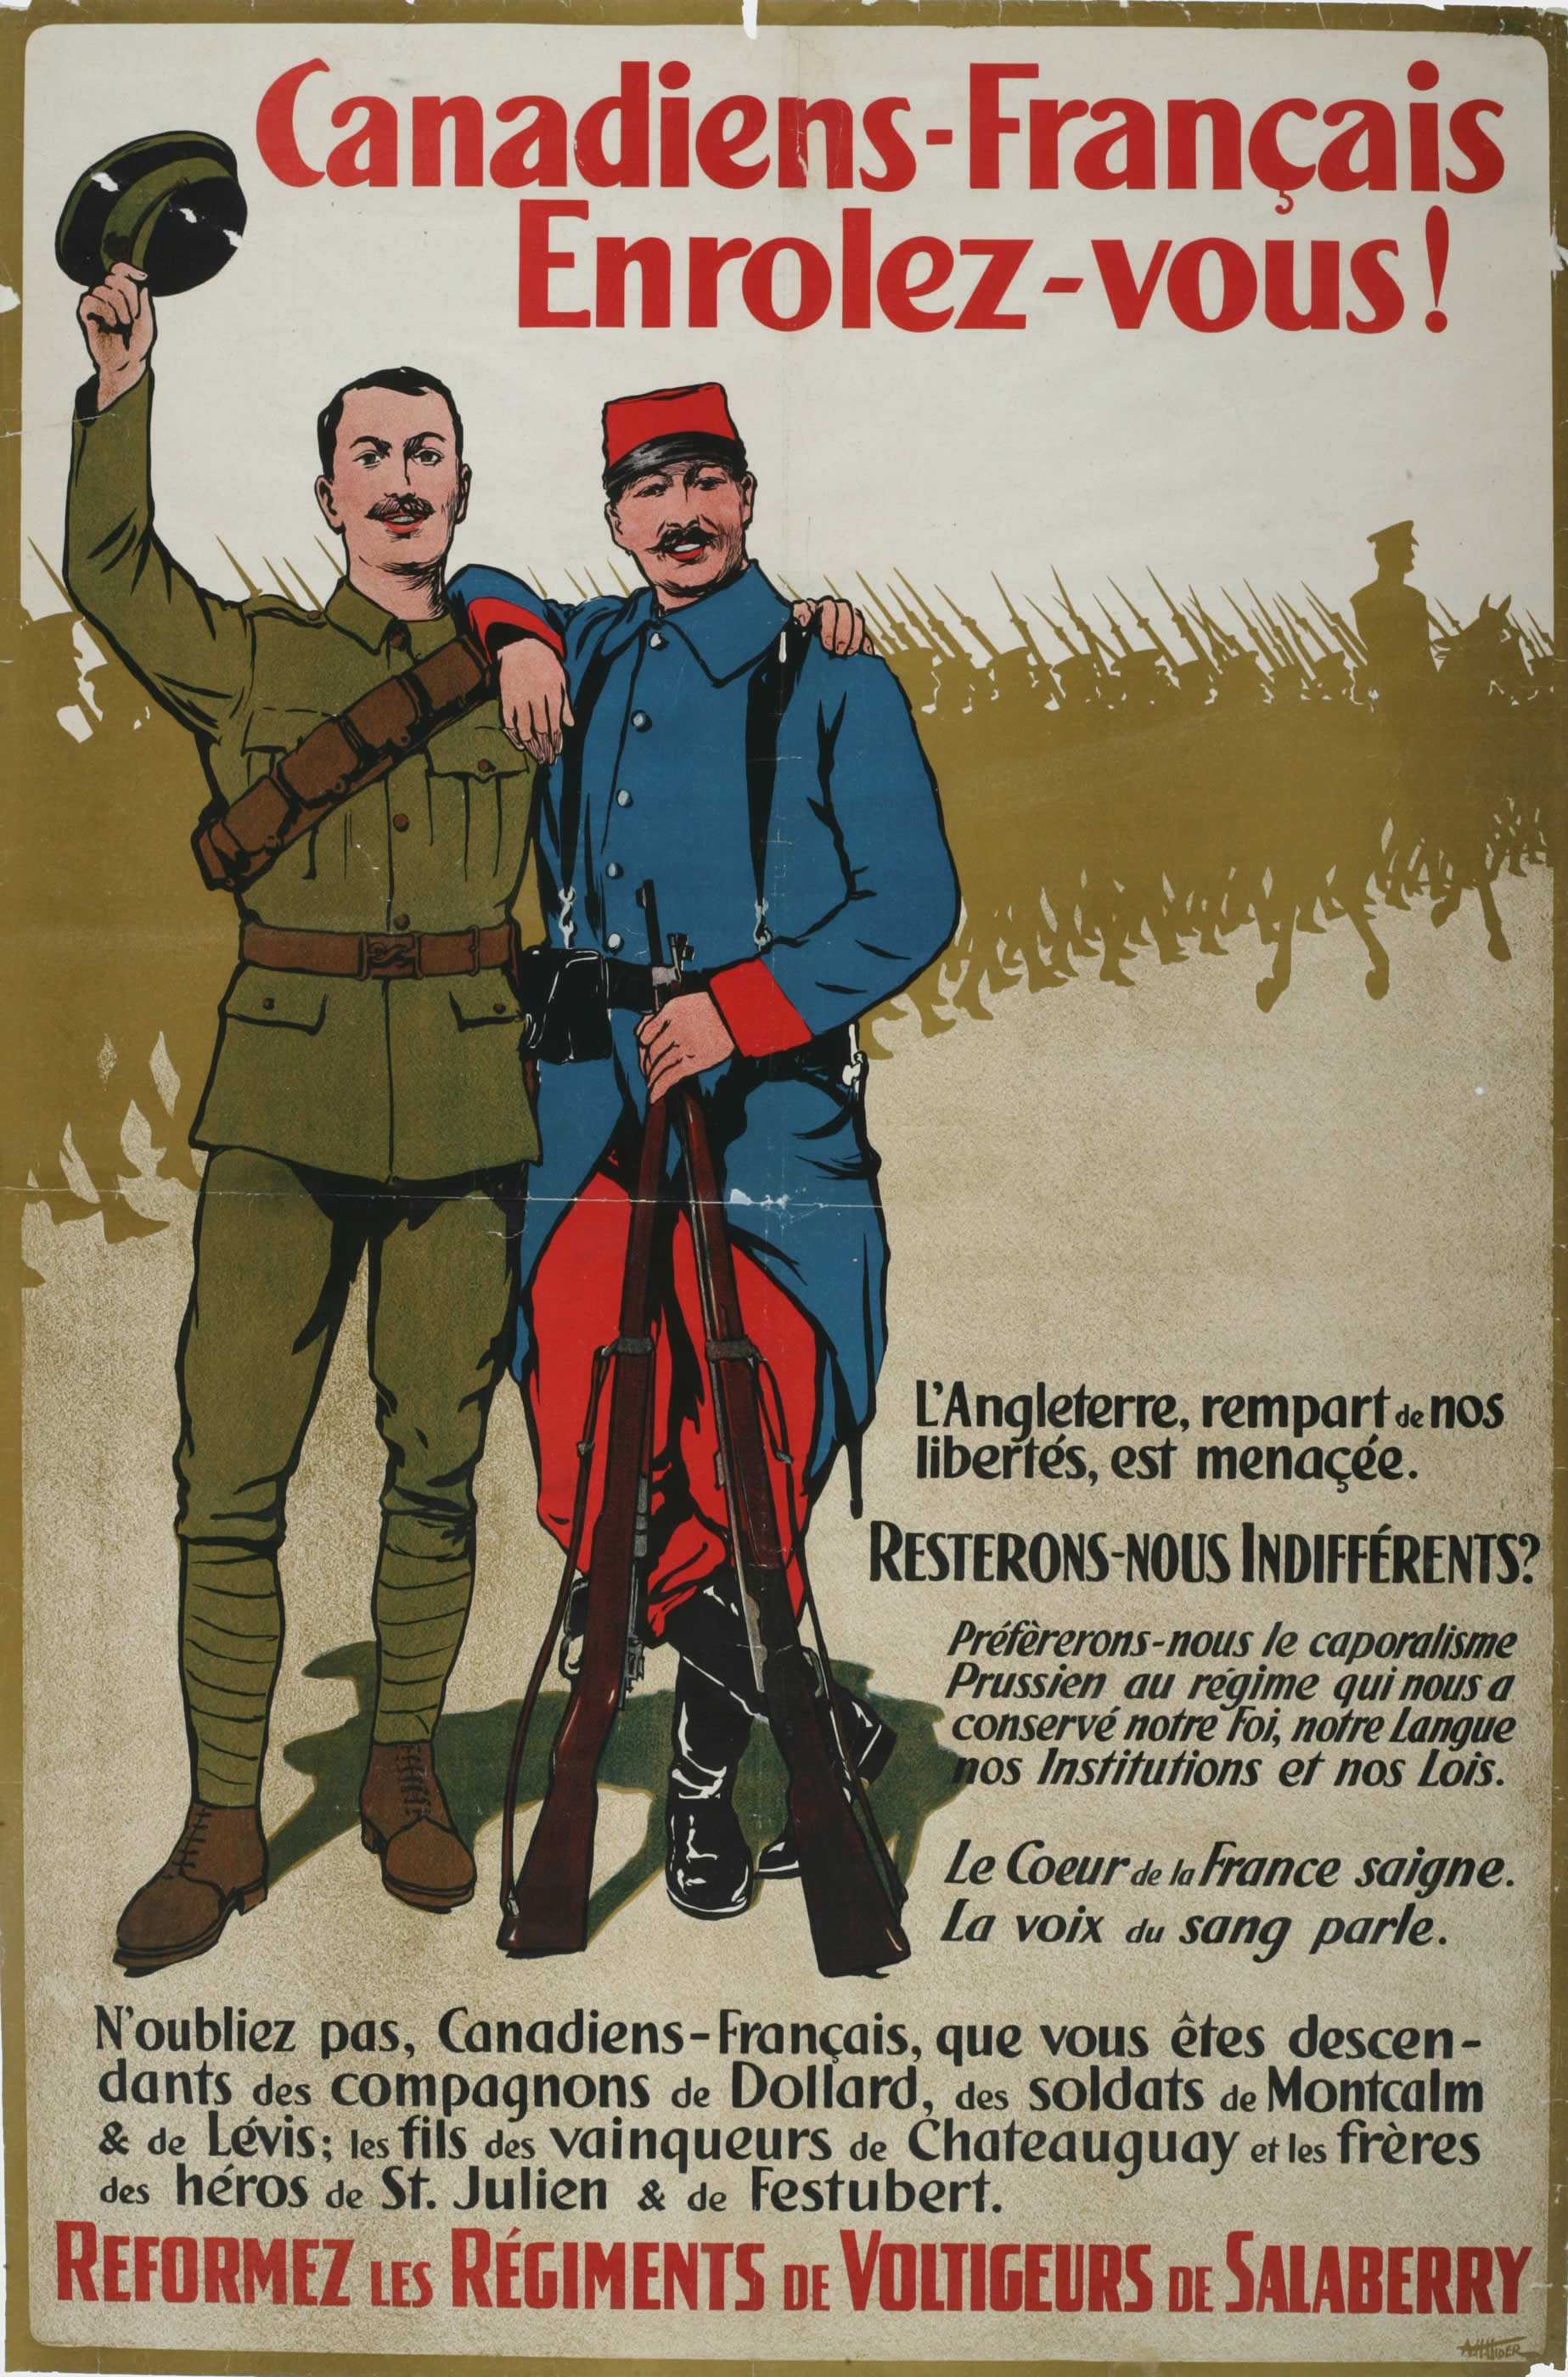 Illustrated poster, colour. French. Two soldiers, dressed in colours traditional to the English and French, stand with their arms around each other in a show of camaraderie.